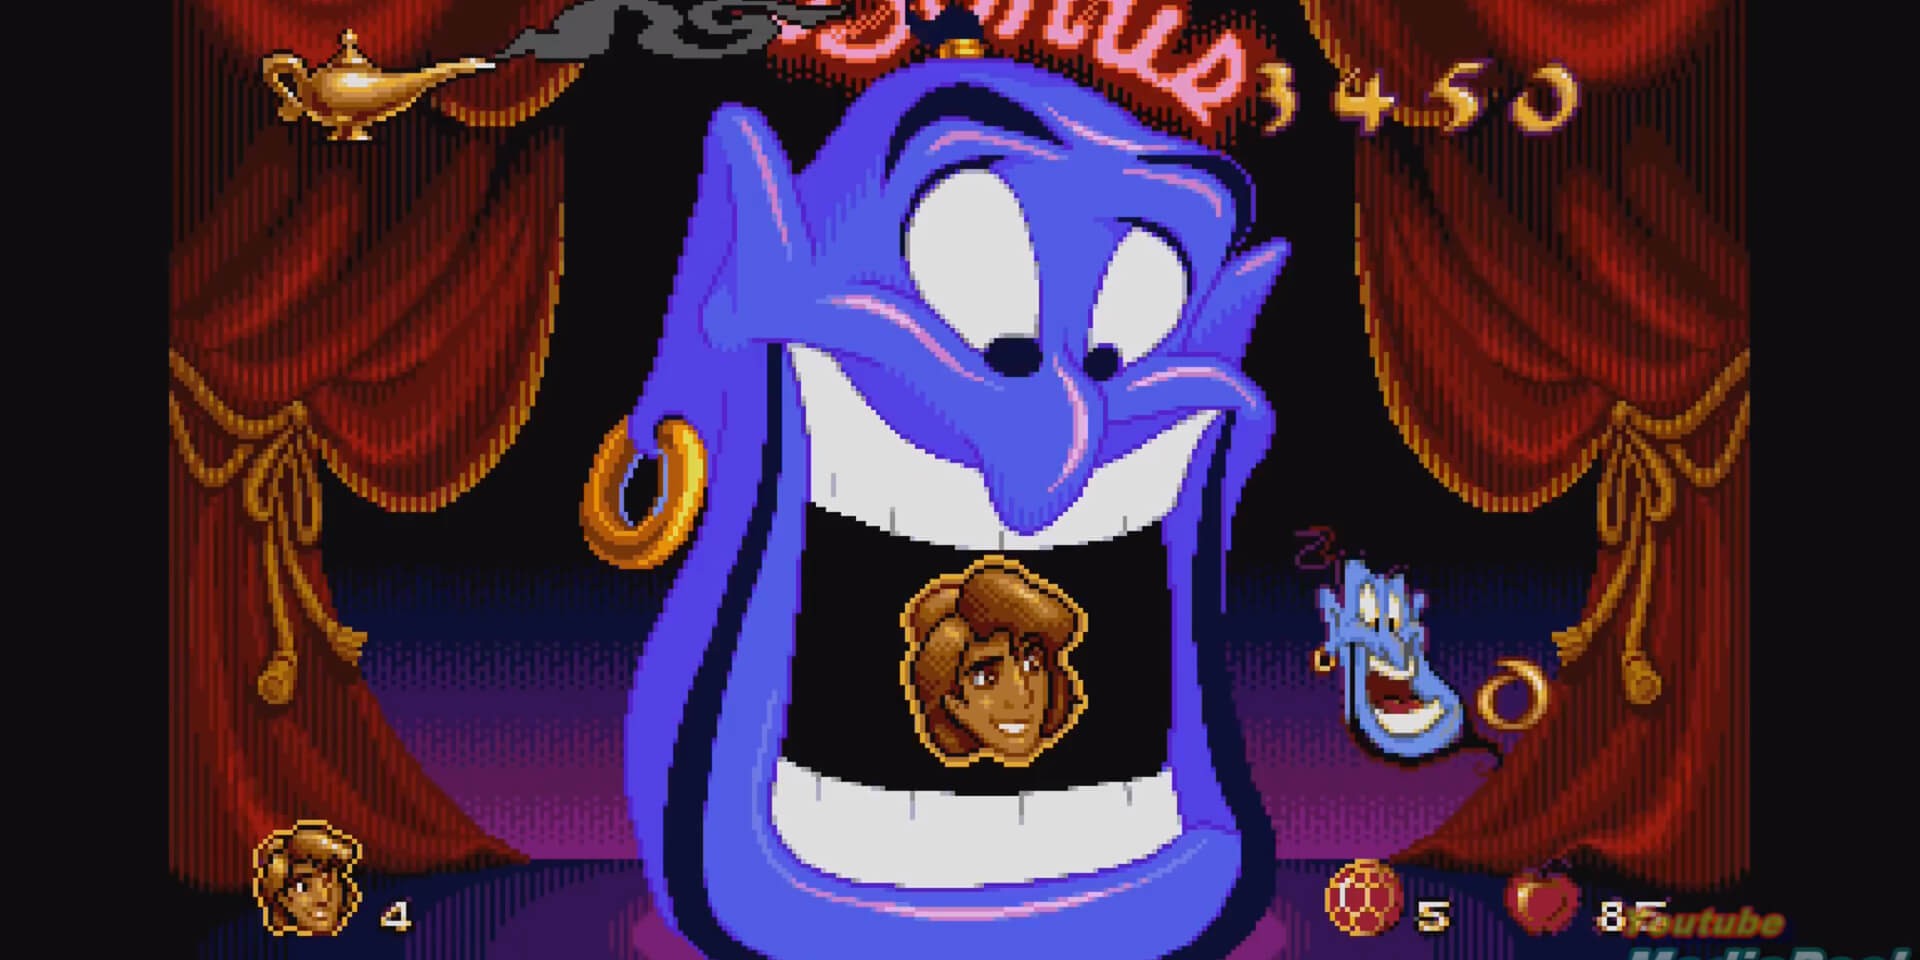 versions of the aladin game